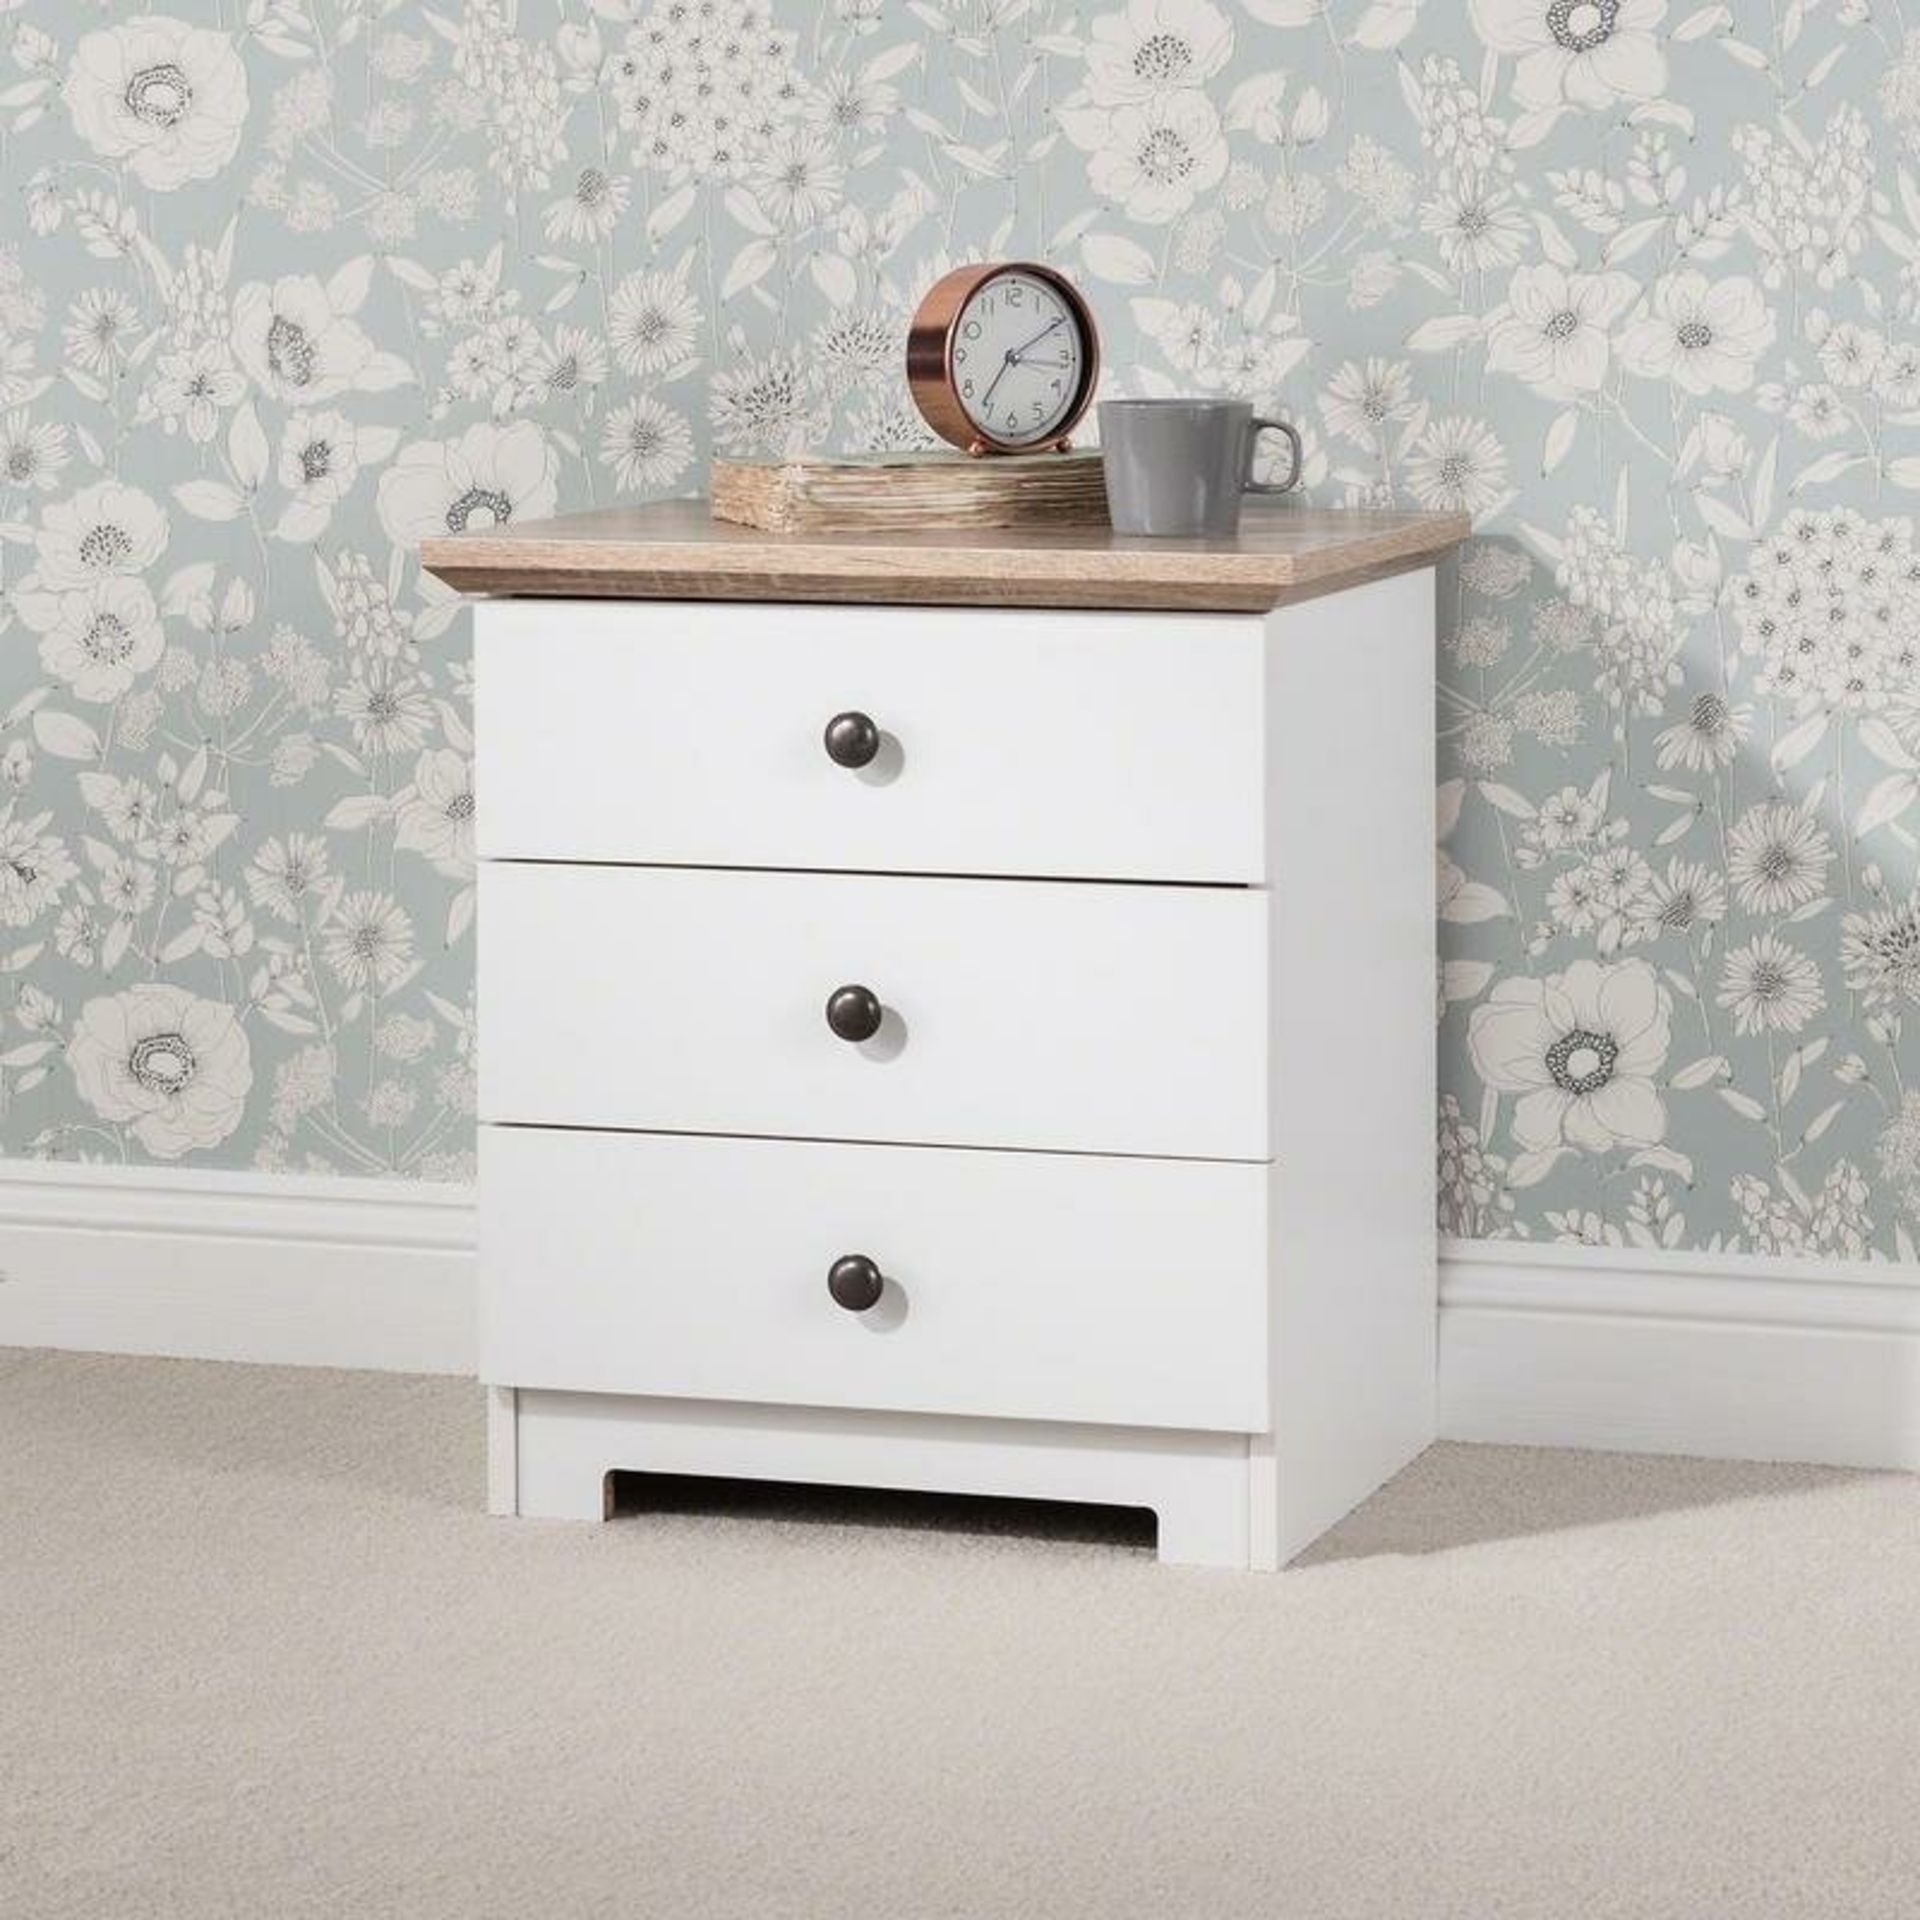 BOXED HEARN 3 DRAWER BEDSIDE TABLE RRP £79.99 (919)Condition ReportAppraisal Available on Request-